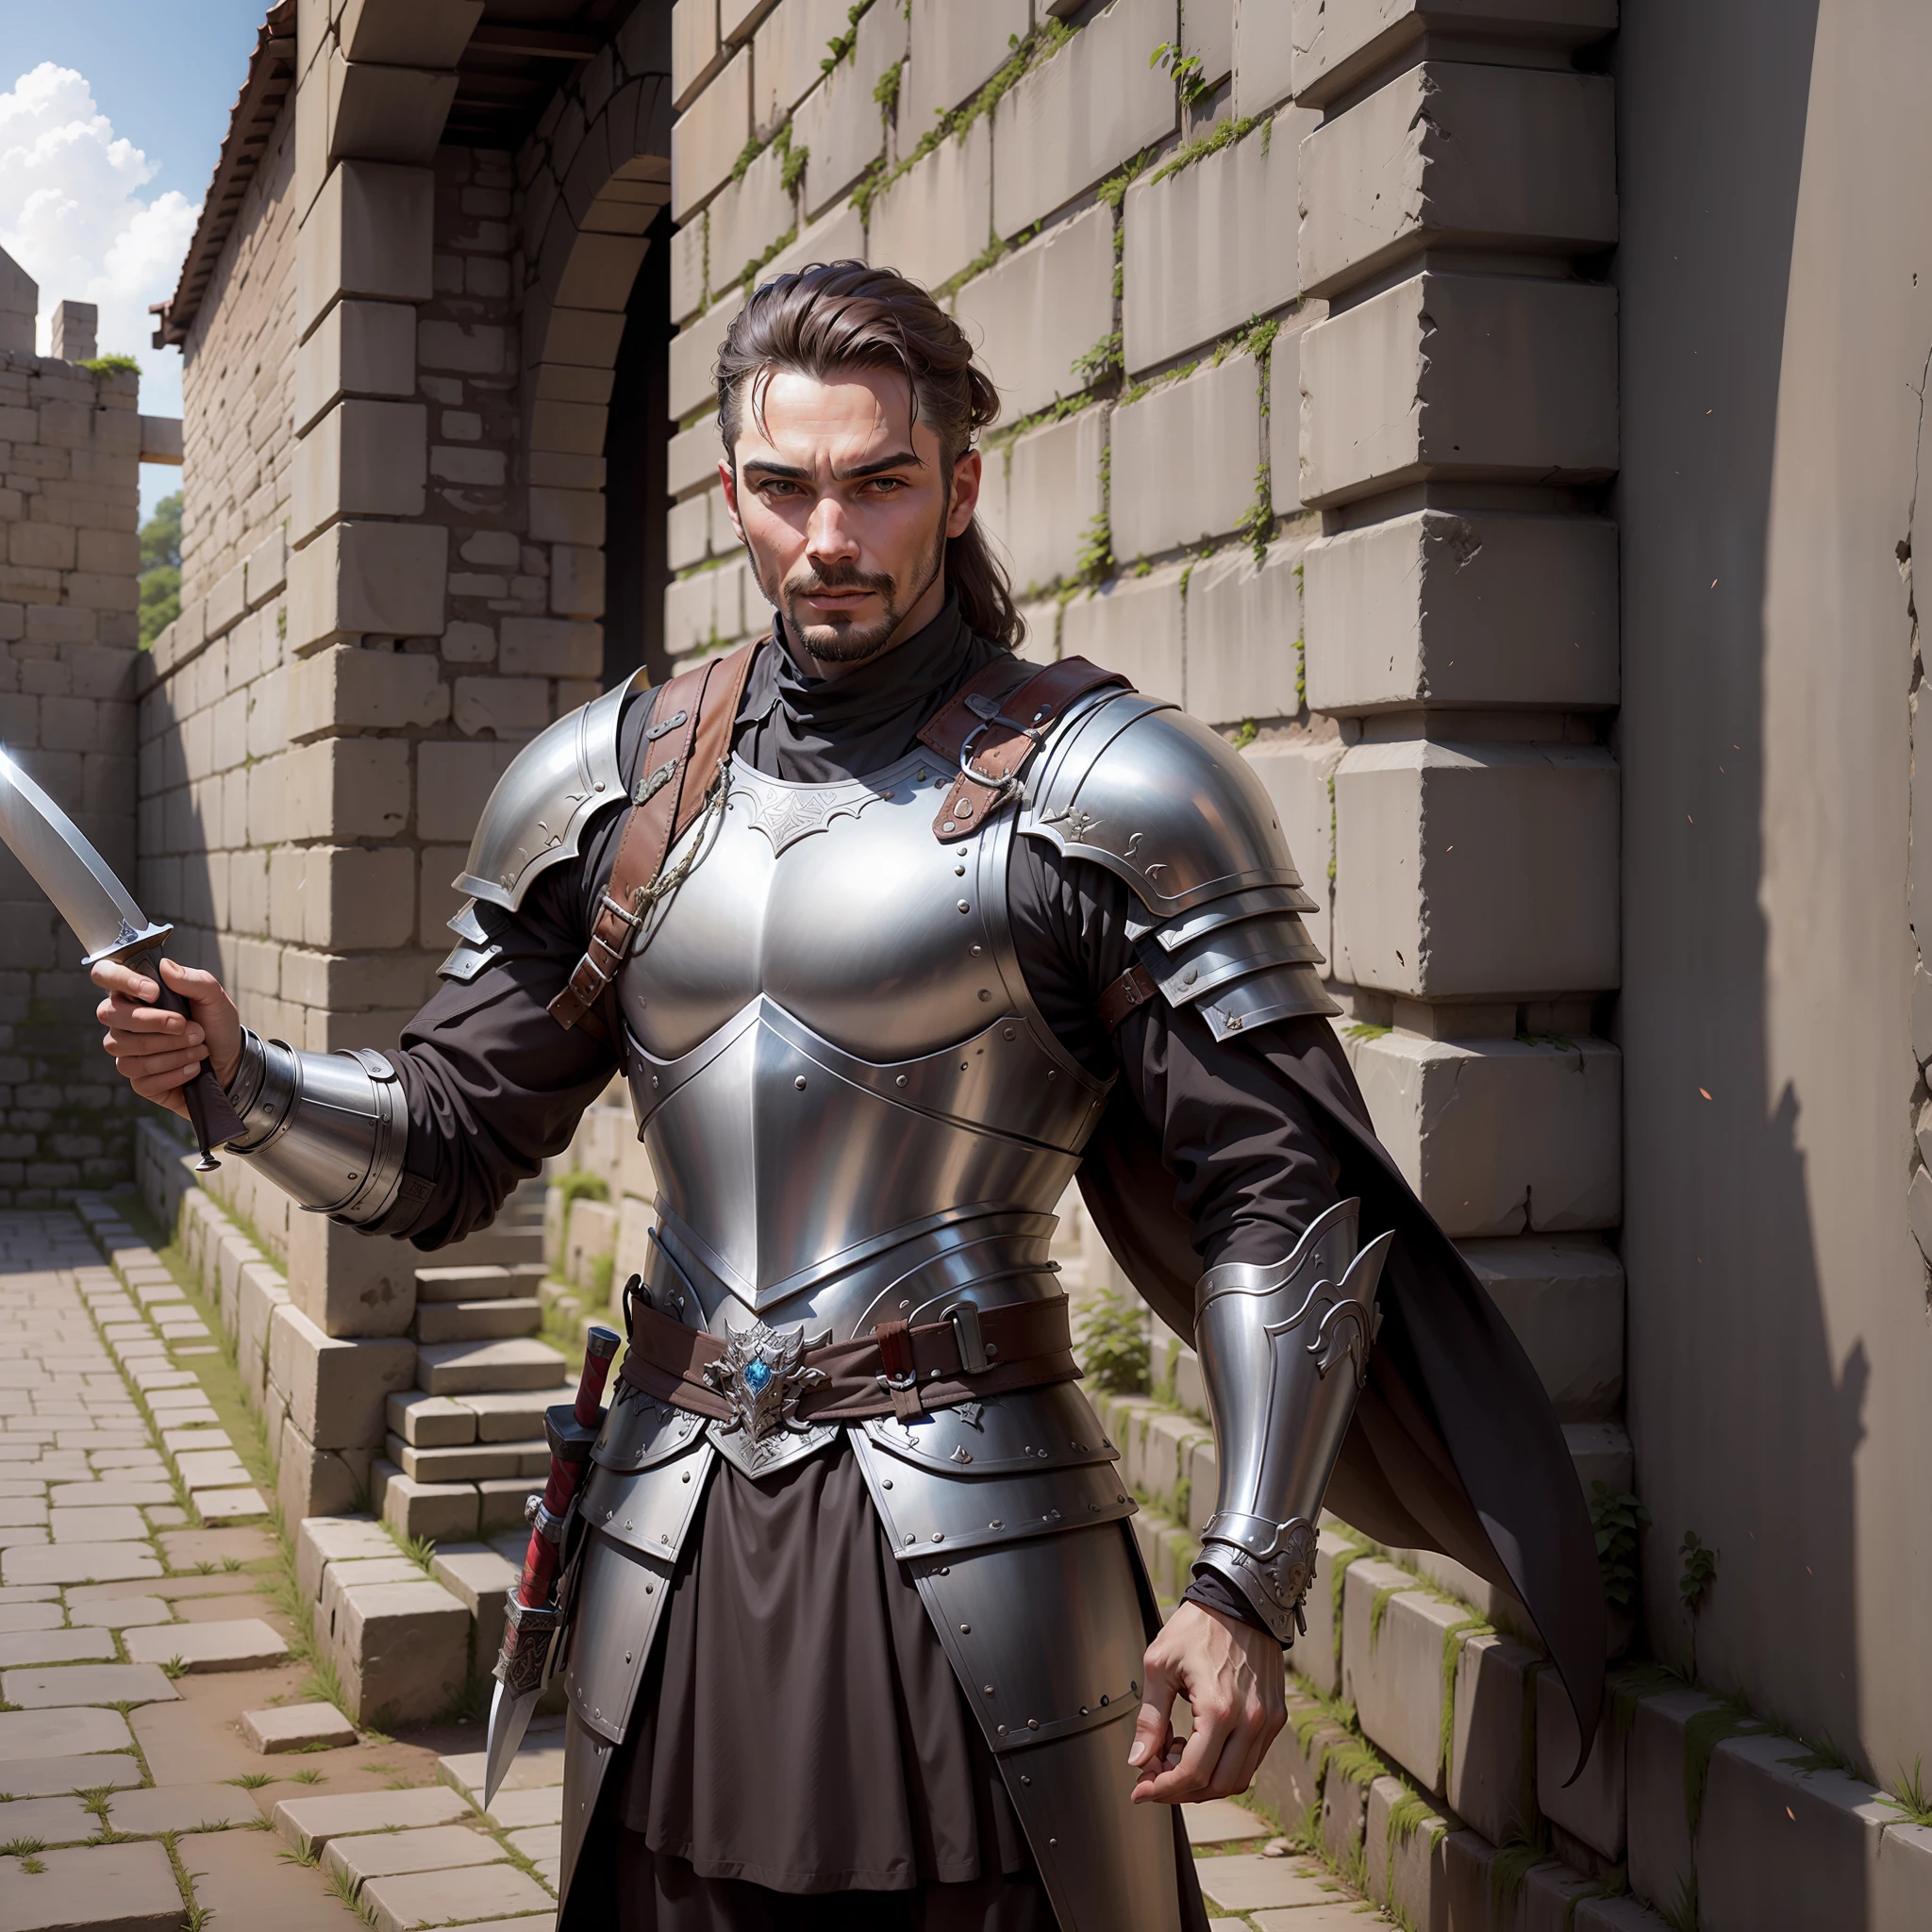 Ancient city walls, a man, dressed in armor and holding a long knife